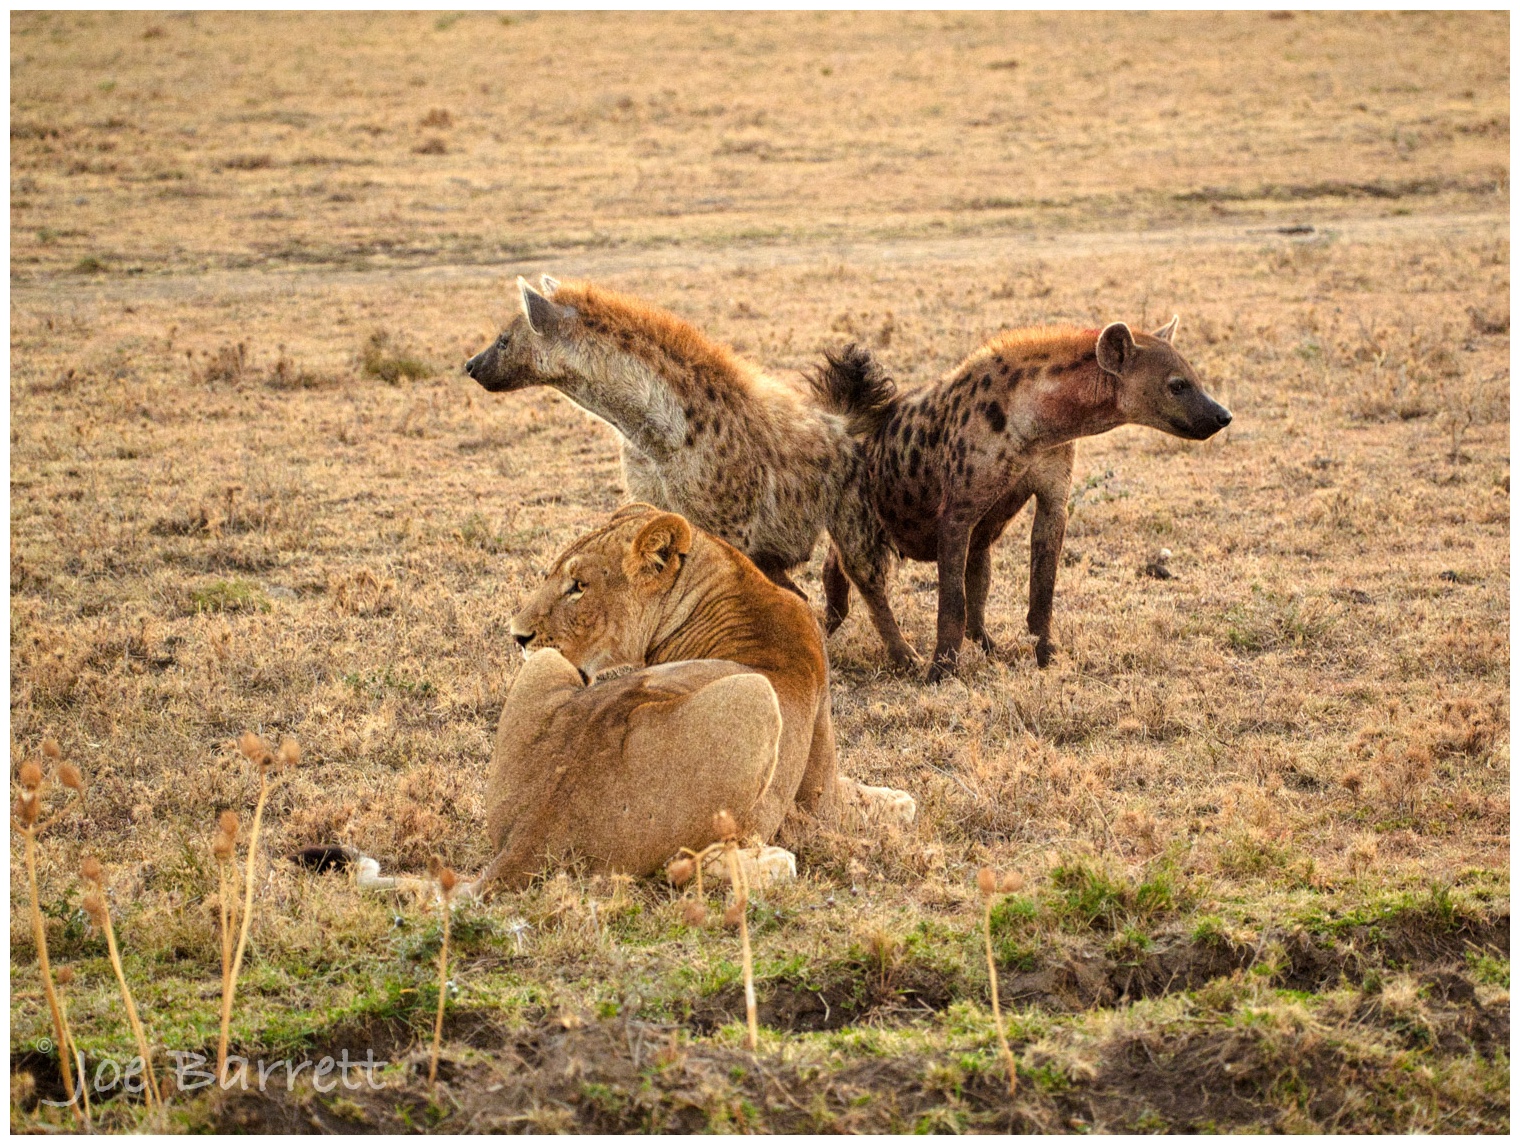  Hyenas after the lions kill.  